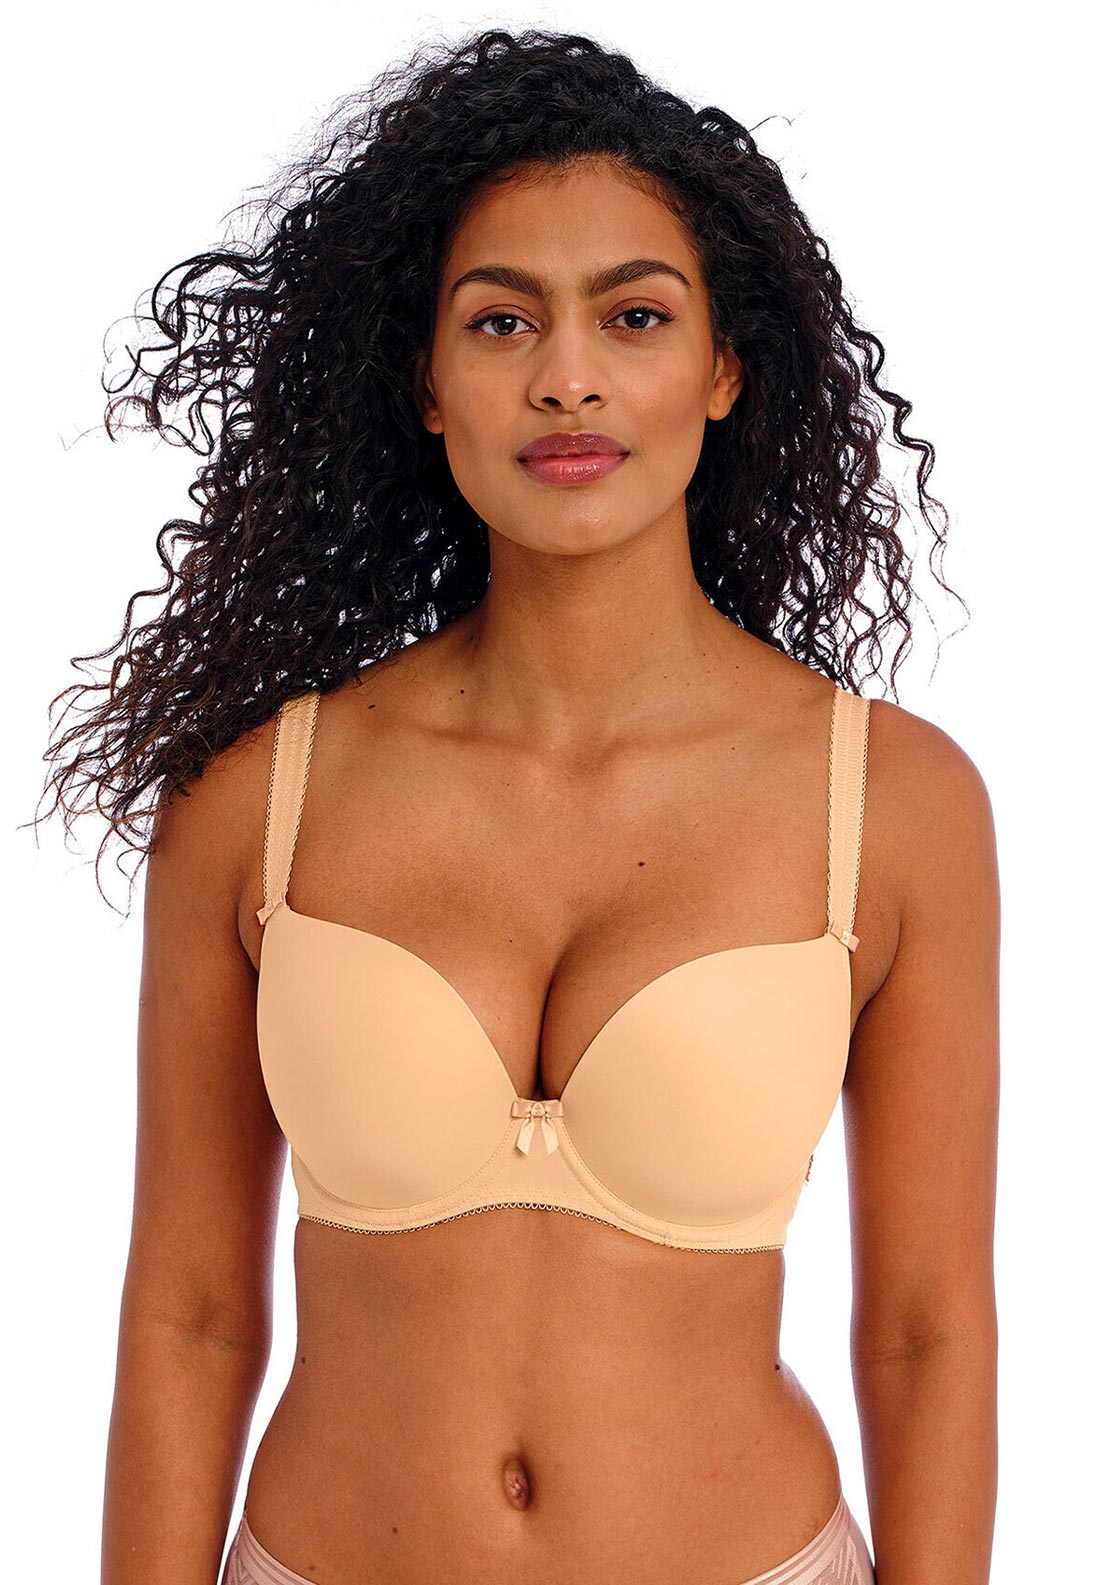 Deco Nude Moulded Plunge Bra from Freya